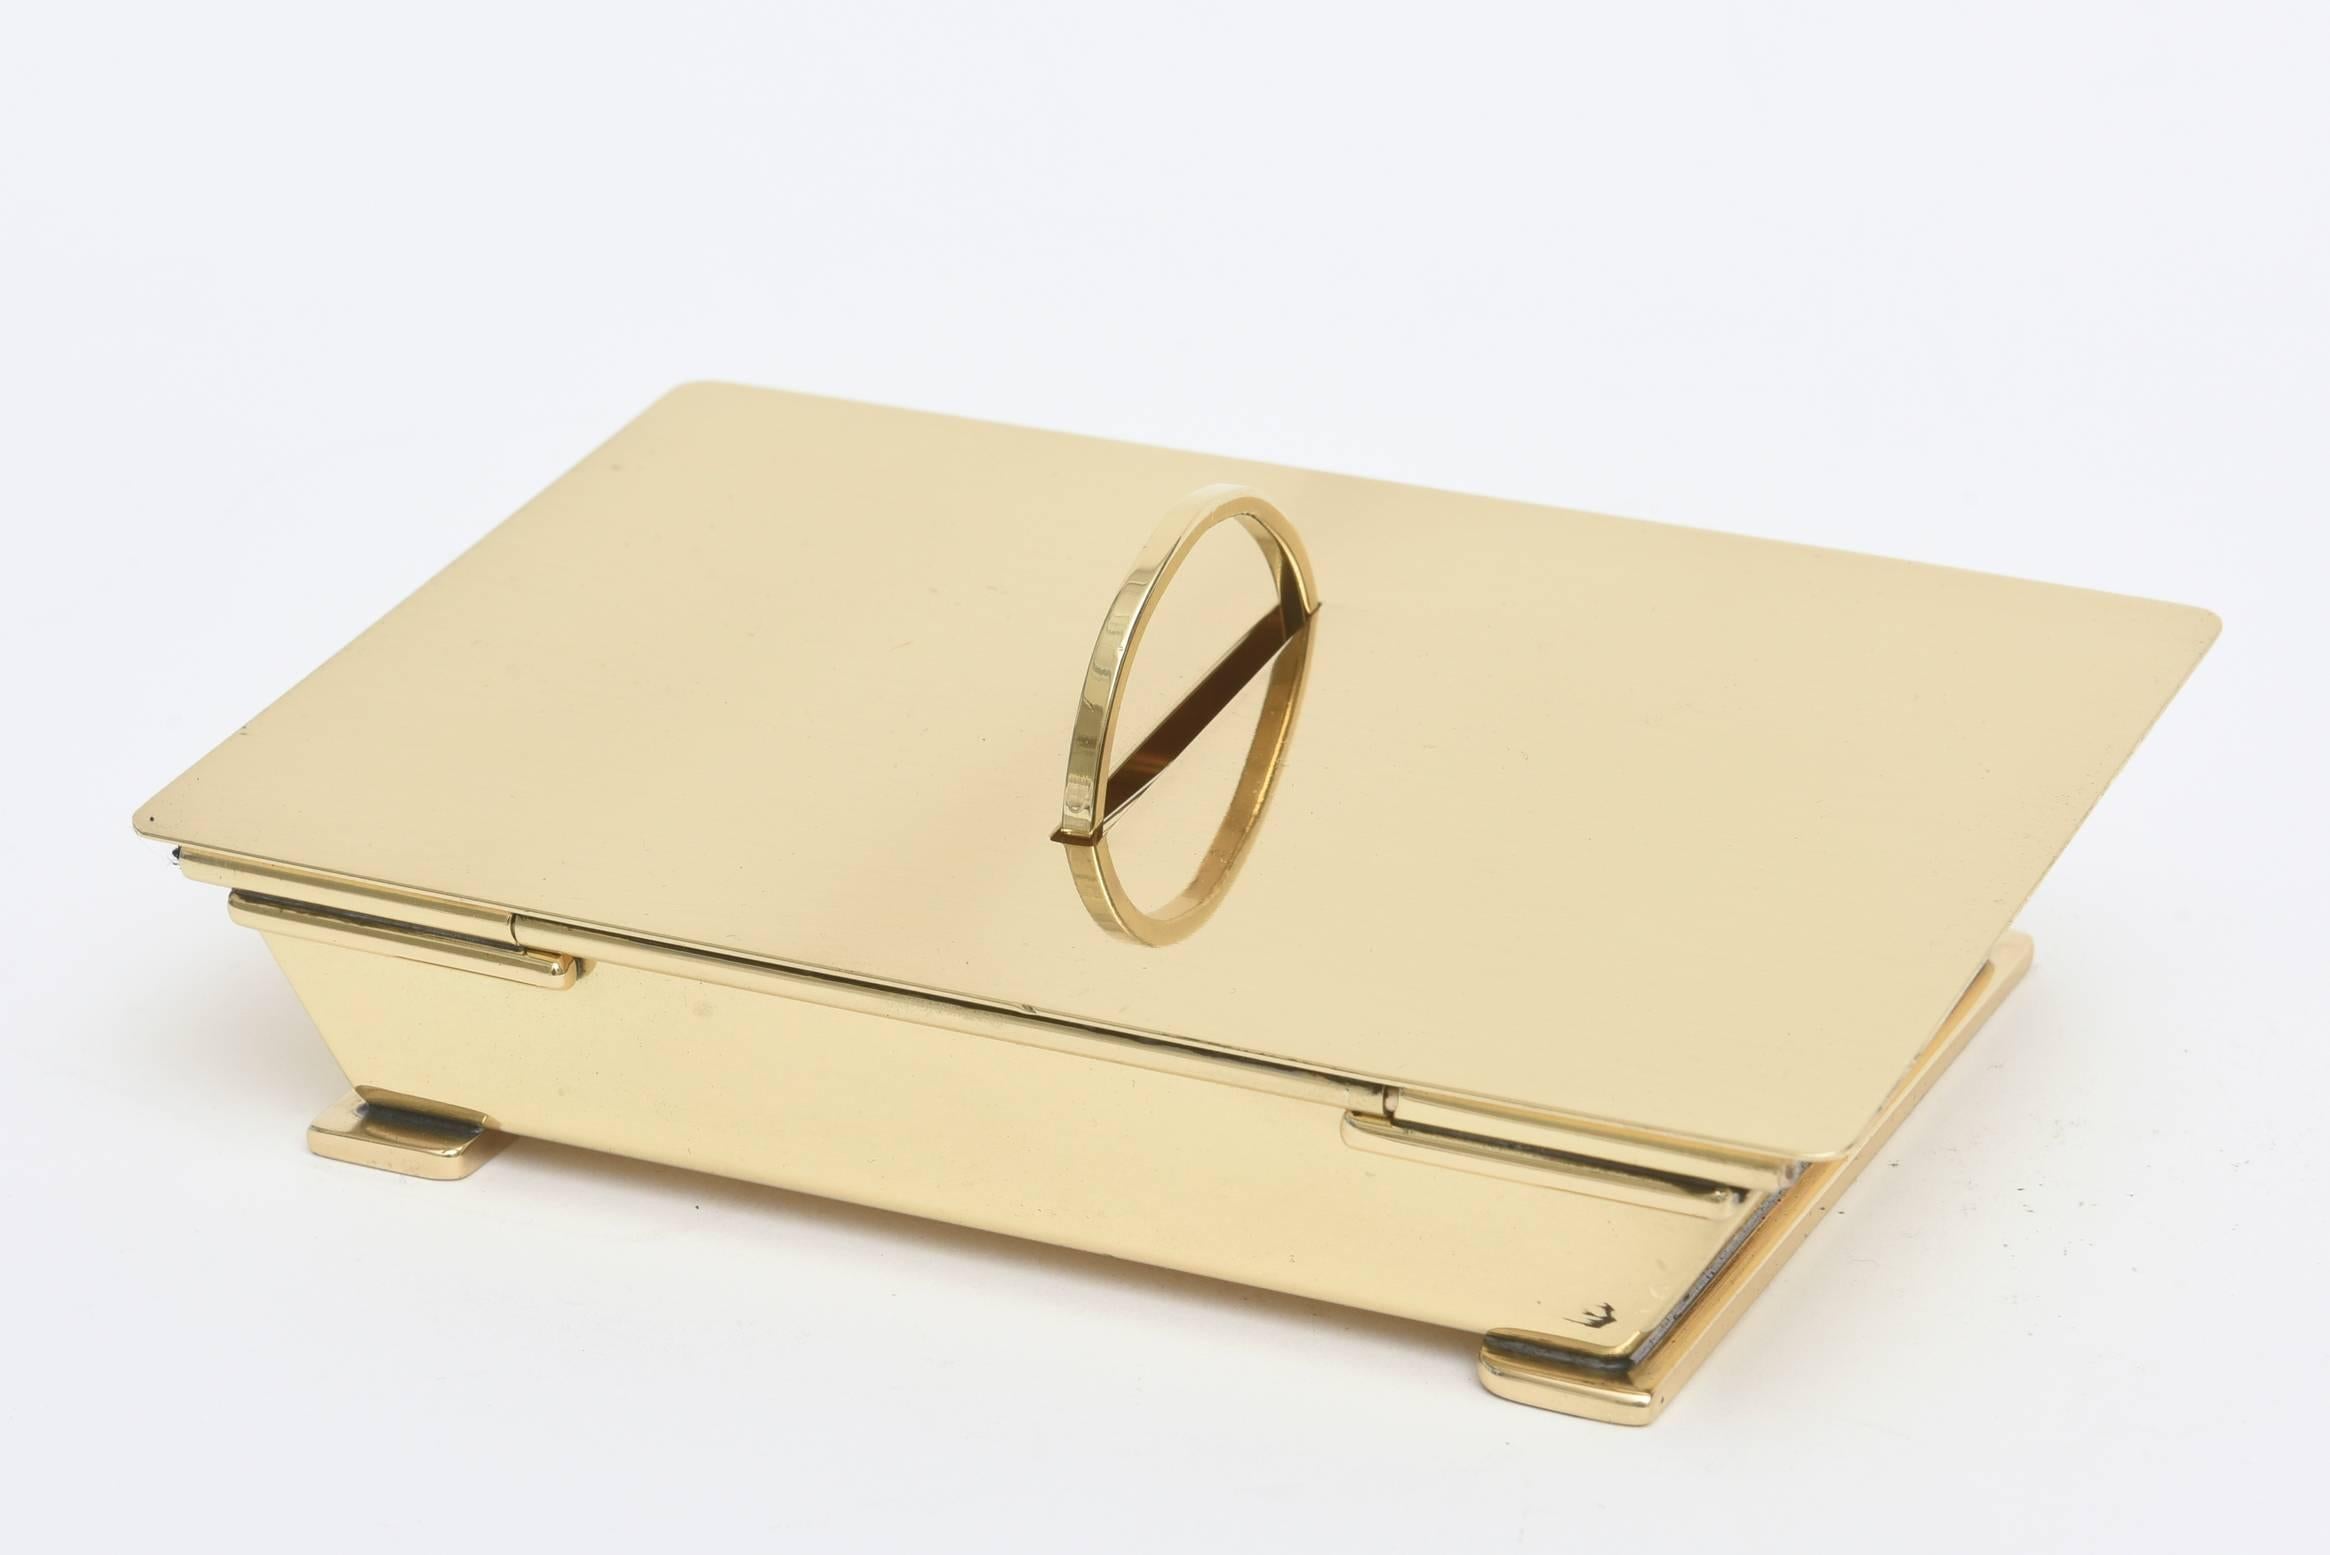 This wonderful brass box is so modernist and Mid-Century. It glistens with
sculptural form.
There is a half circle with an opening when you lift the top part of the hinged box up it now becomes a full circle on the inside with a dissecting brass